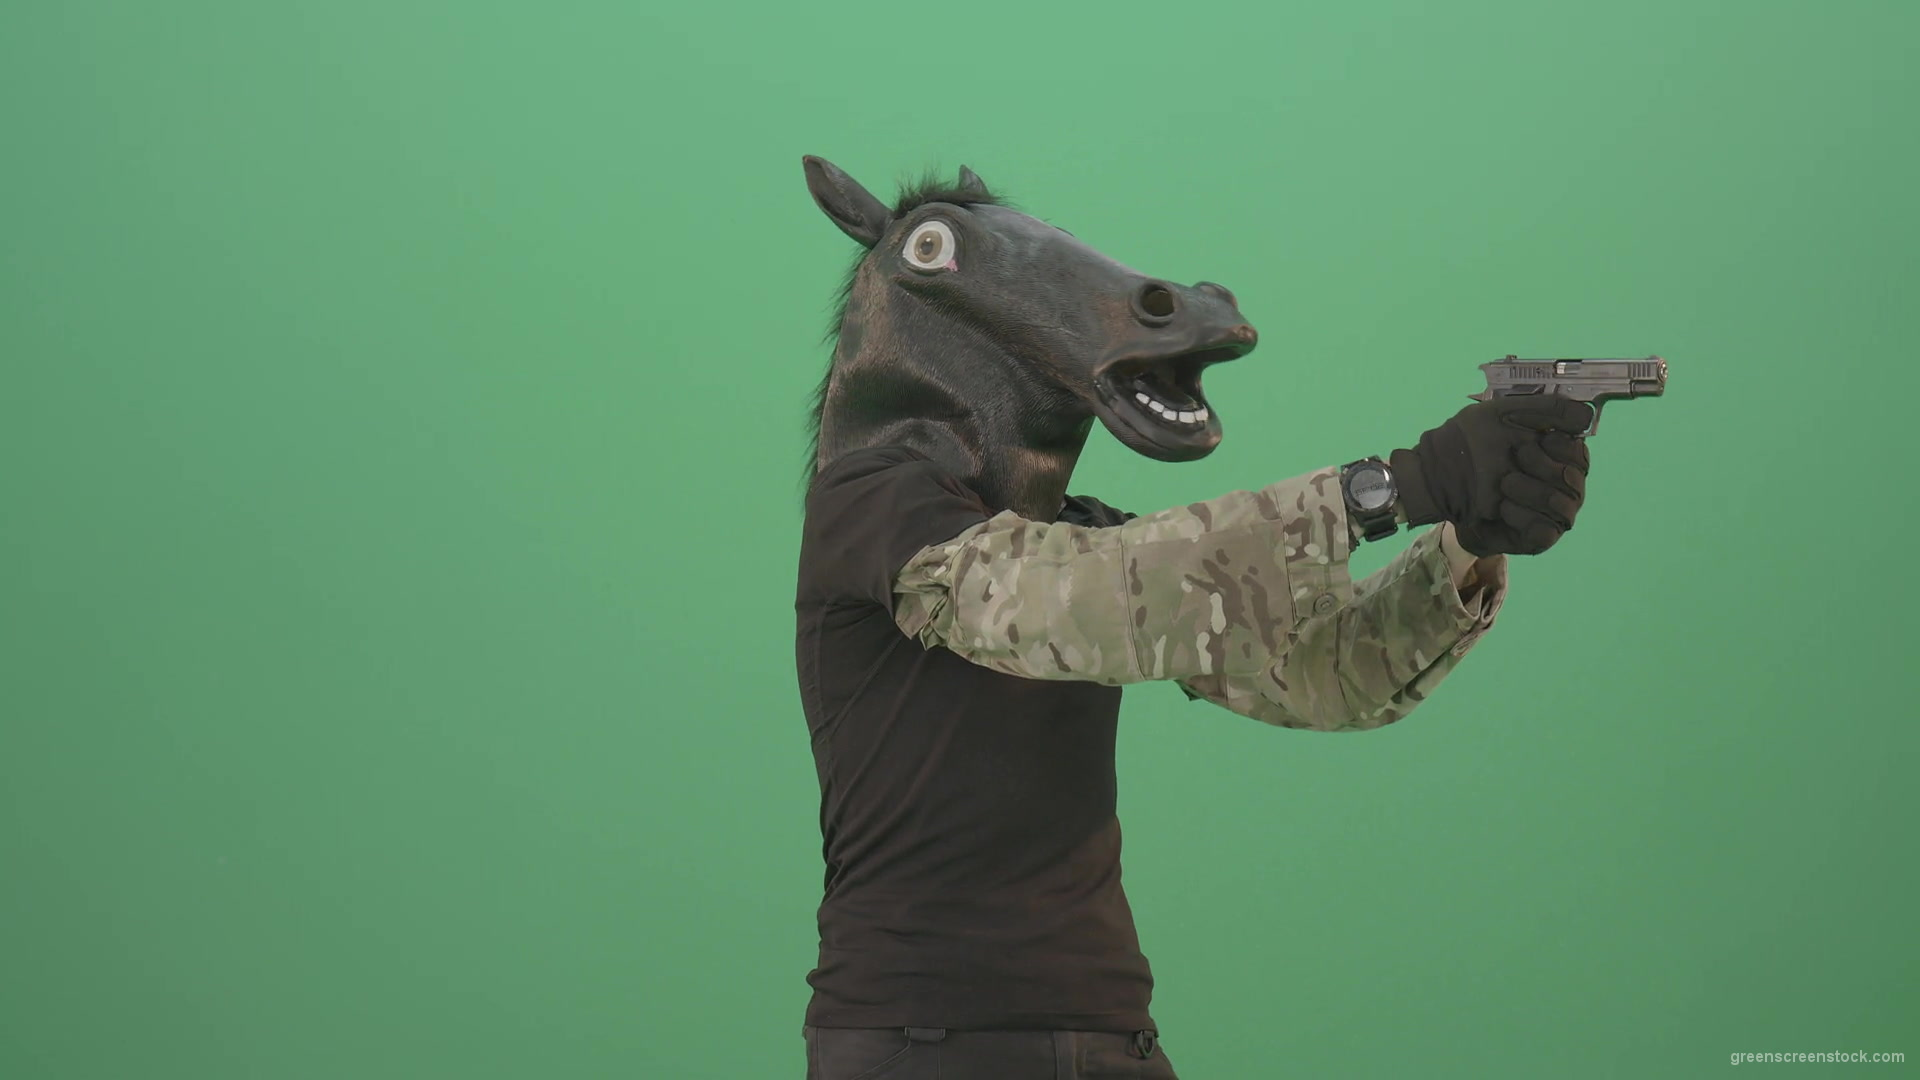 Funny-Horse-Man-in-Mask-shooting-enemies-isolated-on-green-screen-4K-Video-Footage-1920_009 Green Screen Stock